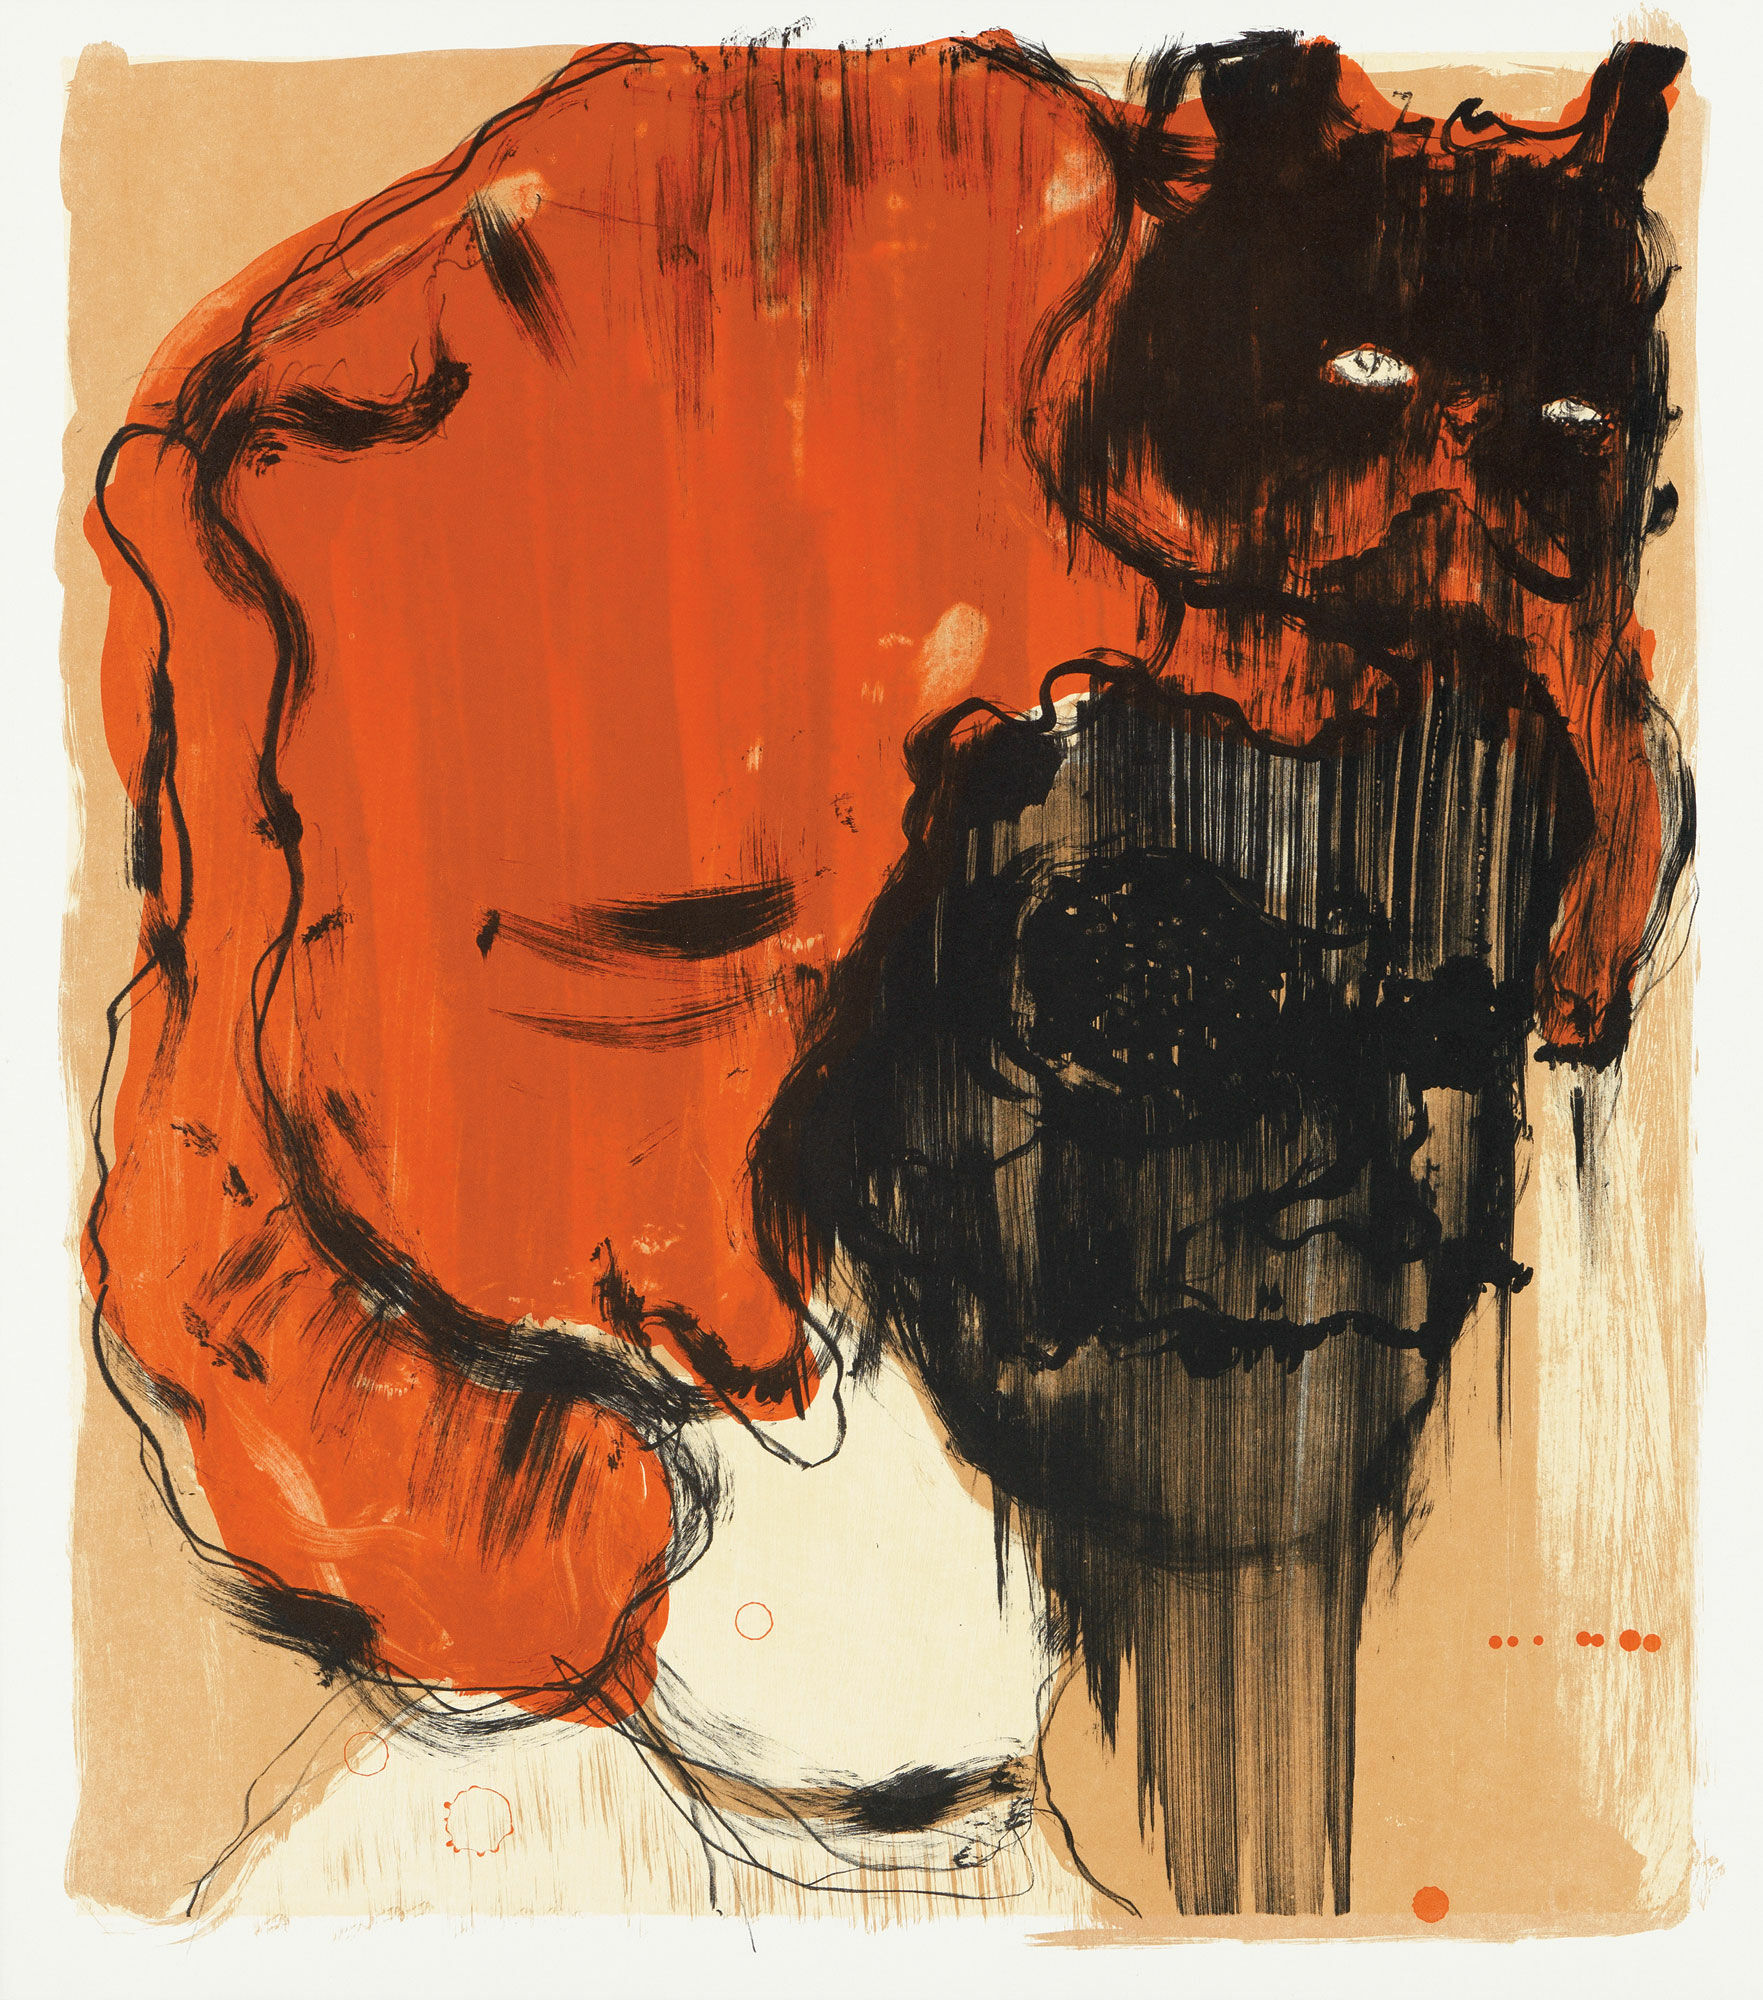 Picture "Untitled (red)" (2013) by Gert & Uwe Tobias